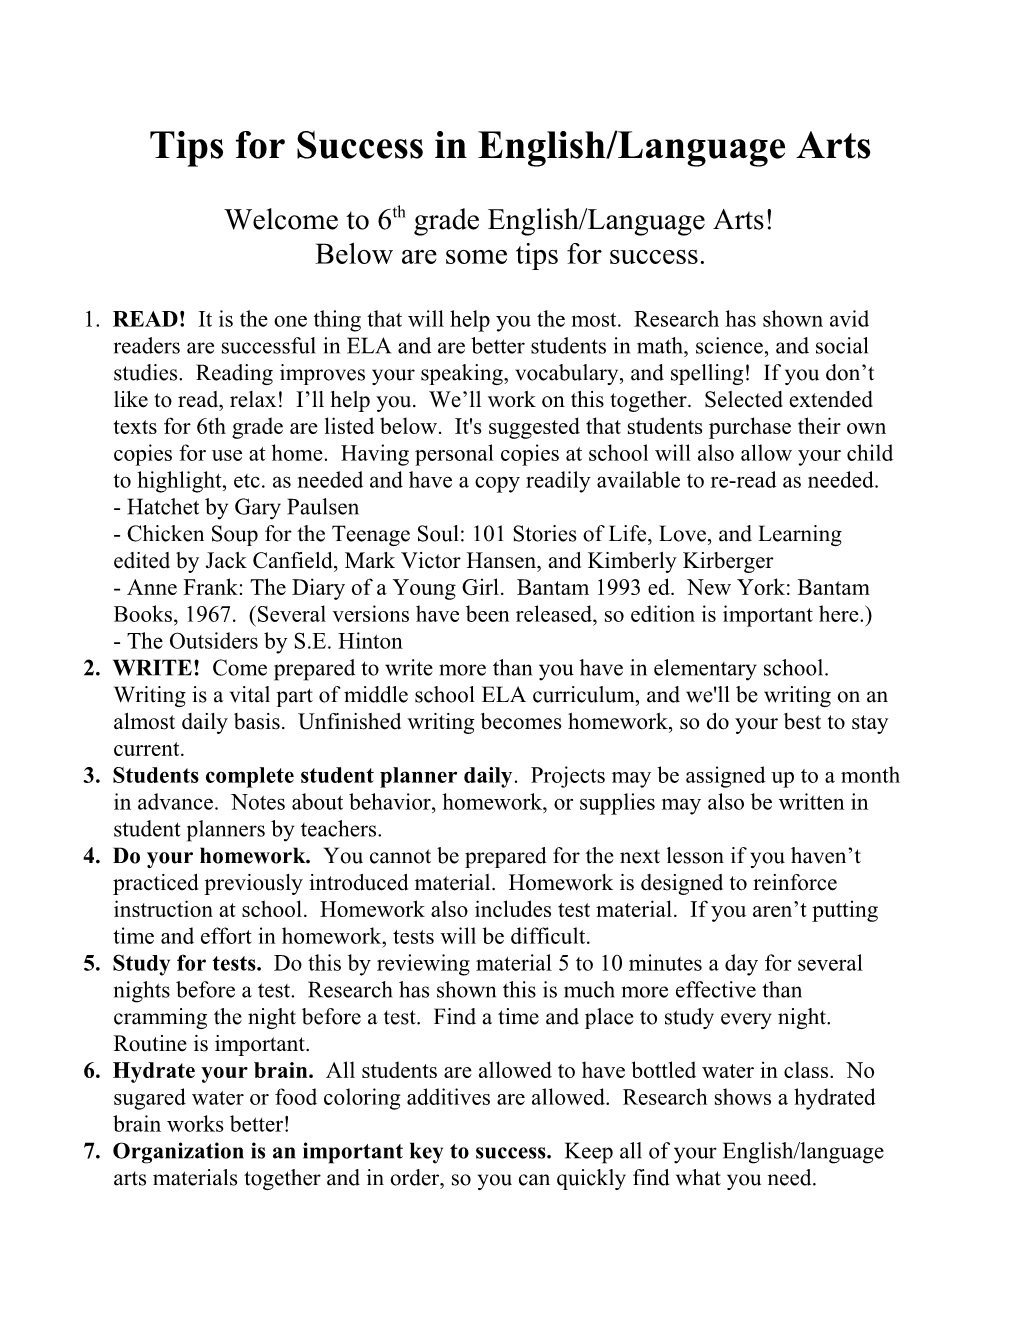 Tips for Success in English/Language Arts